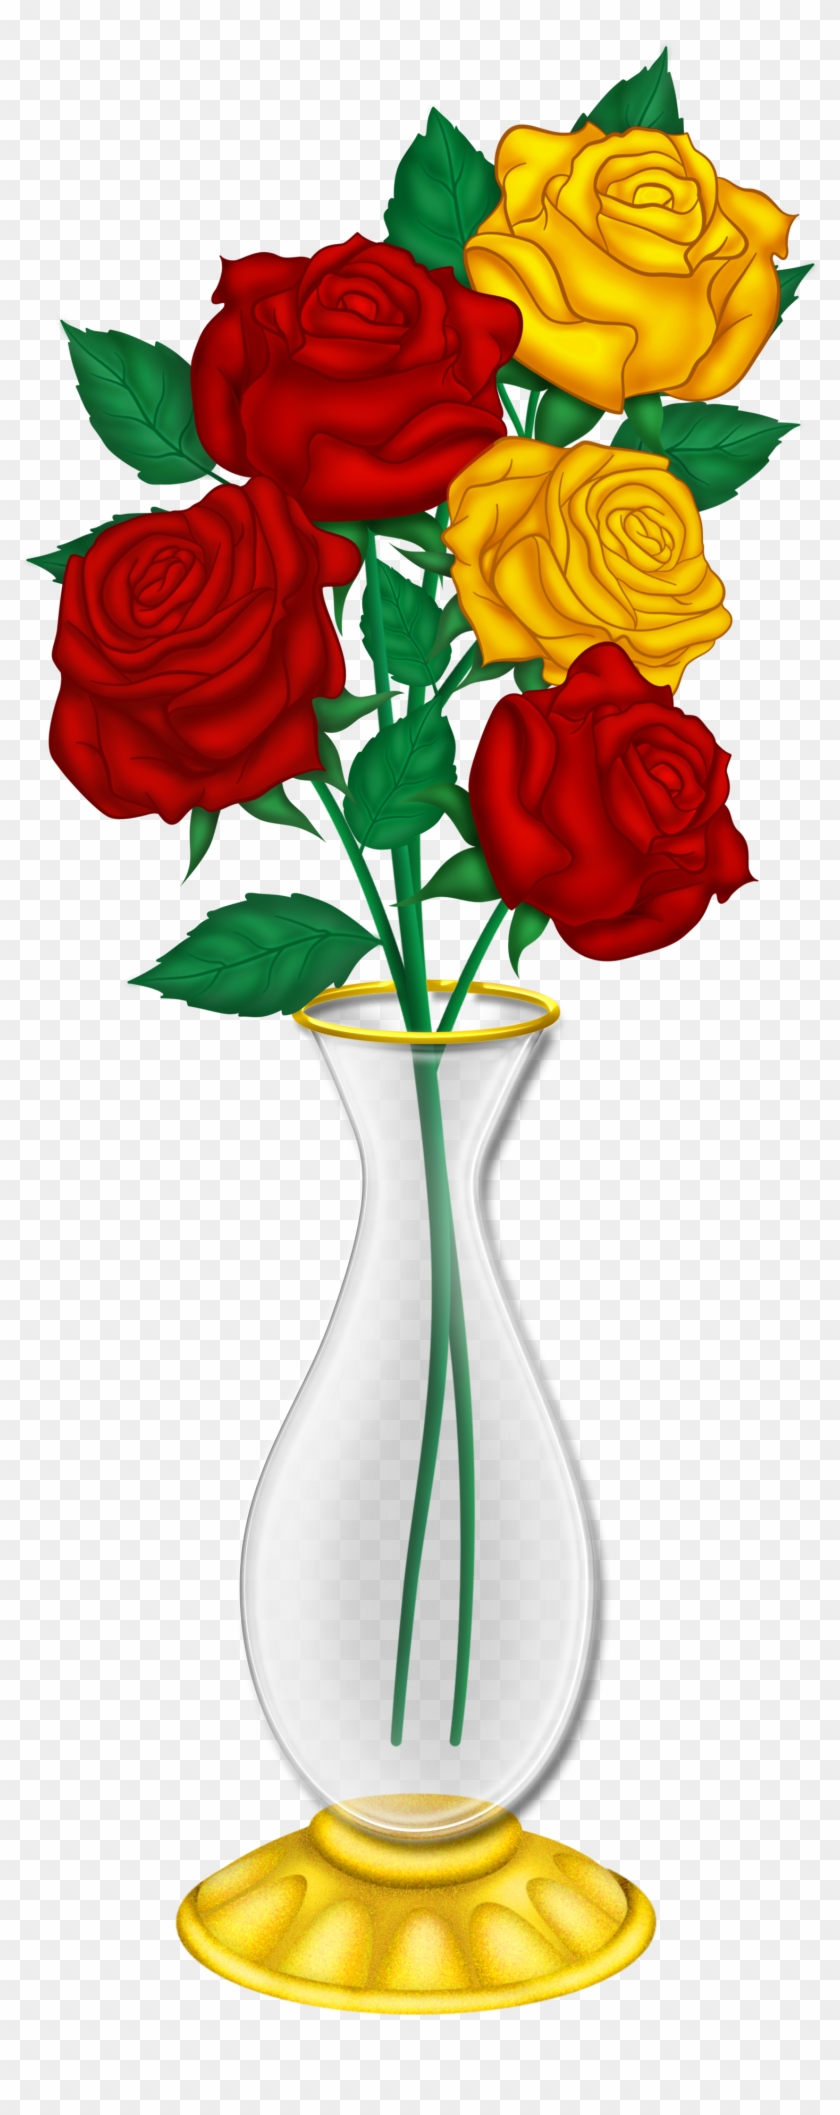 Beautiful Vase With Red And Yellow Roses Png Picture - Vase Clipart Png #201729